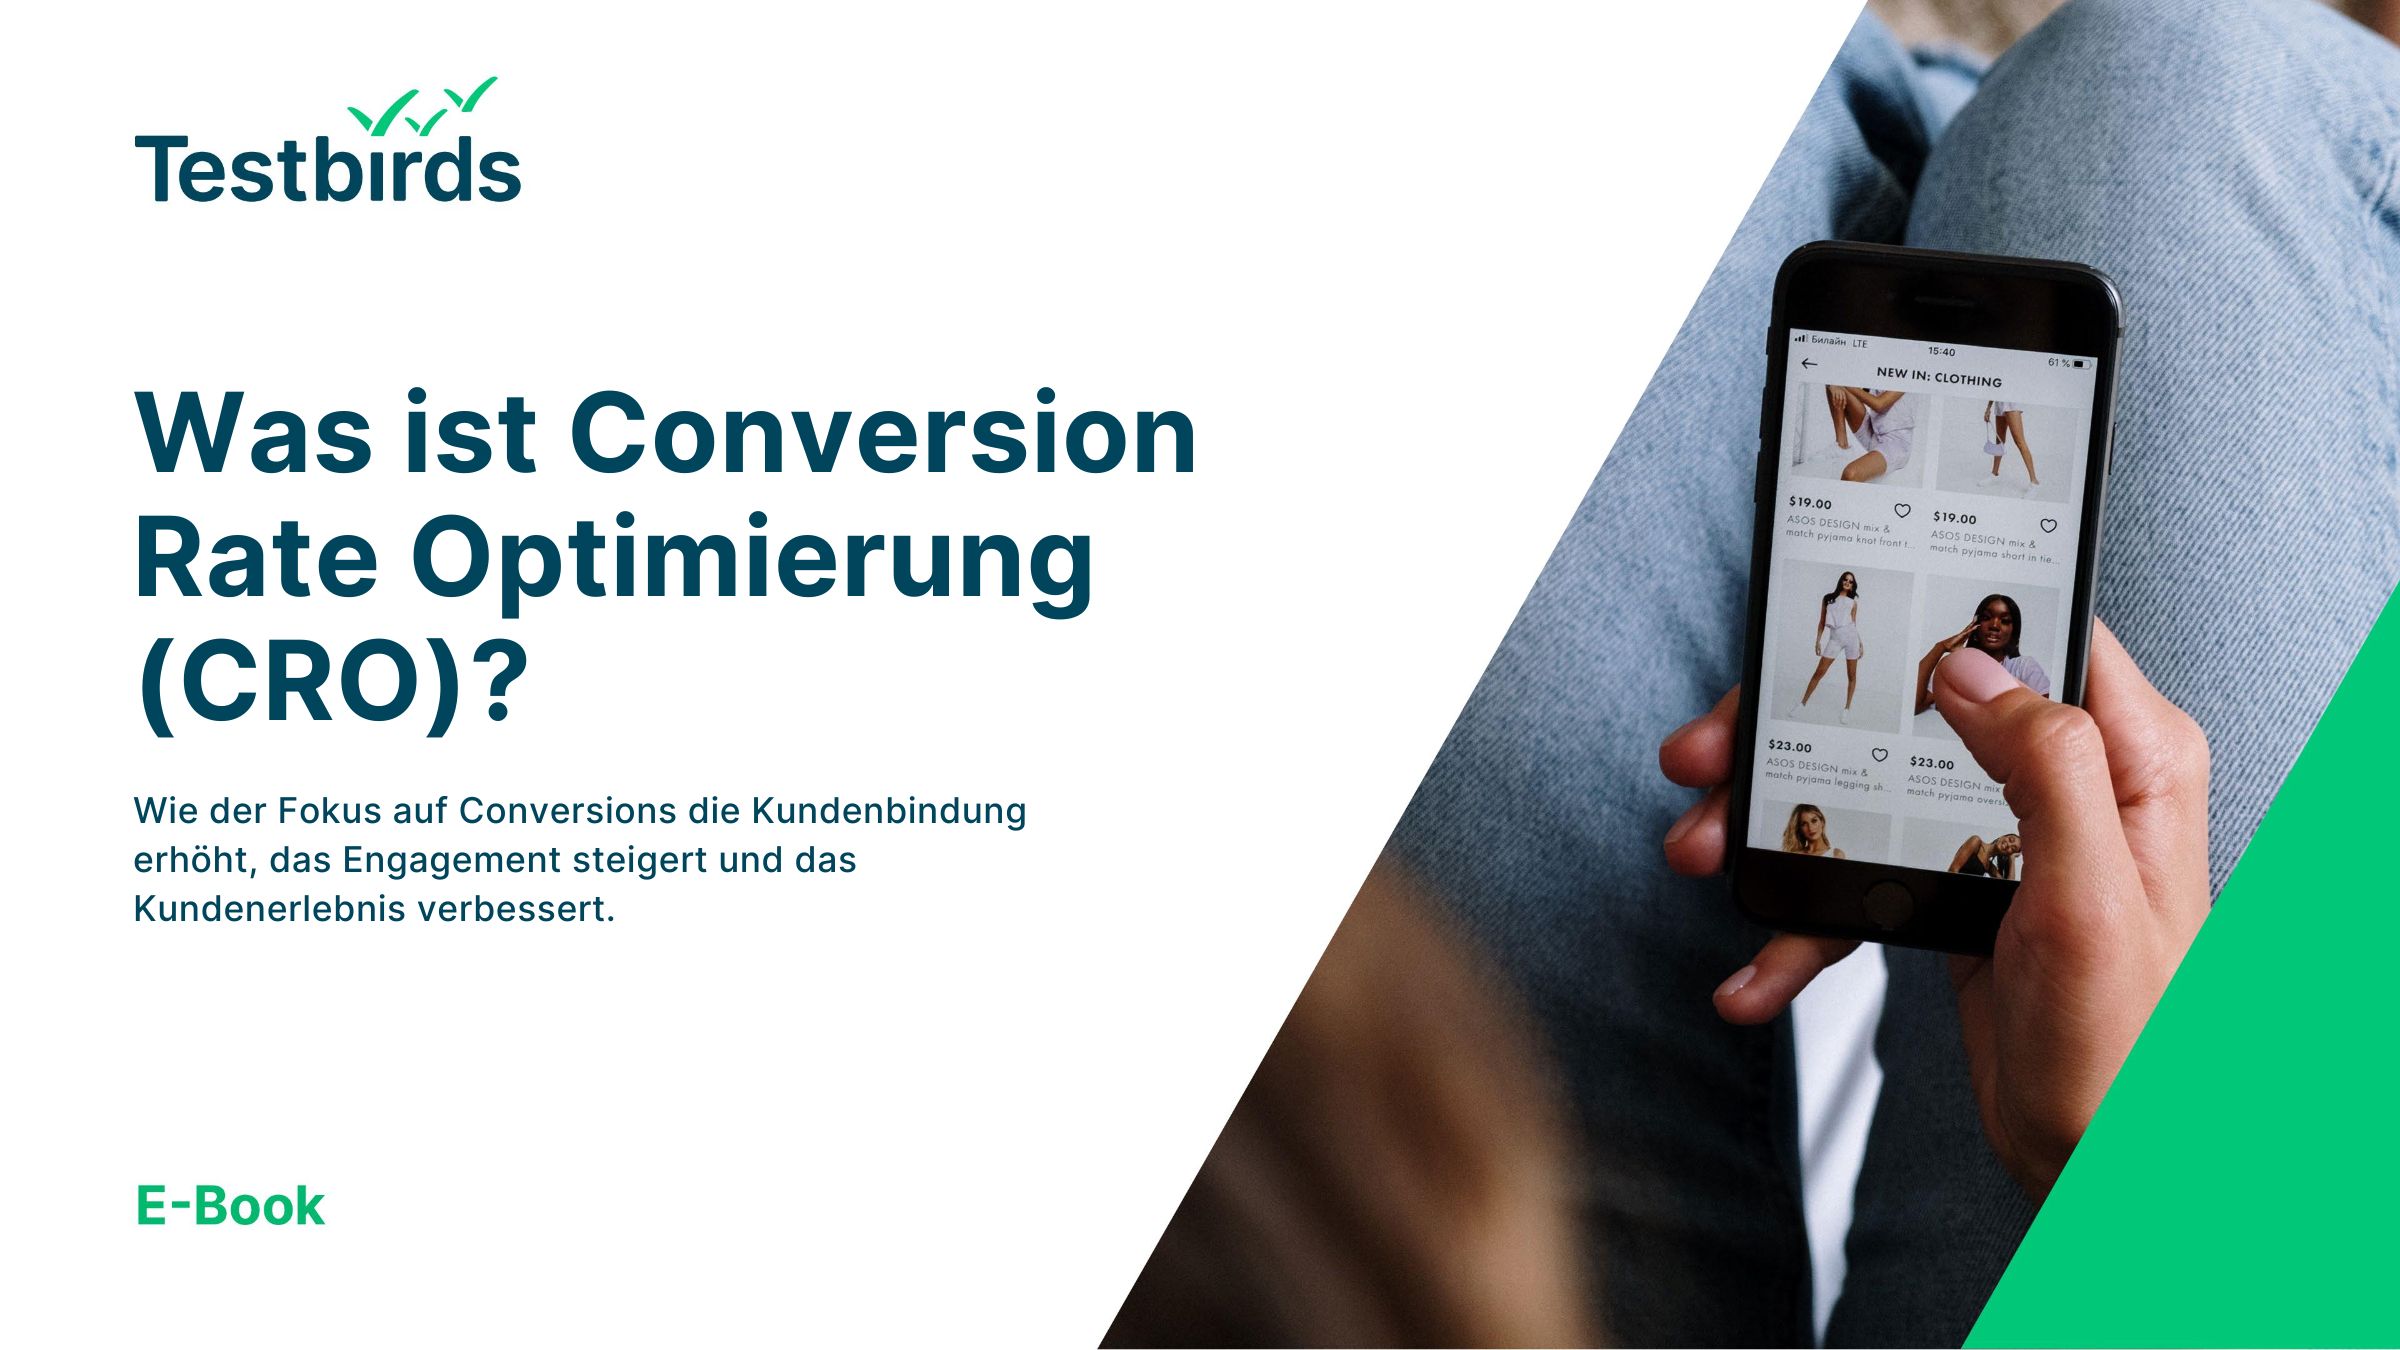 Was ist Conversion Rate Optimierung?